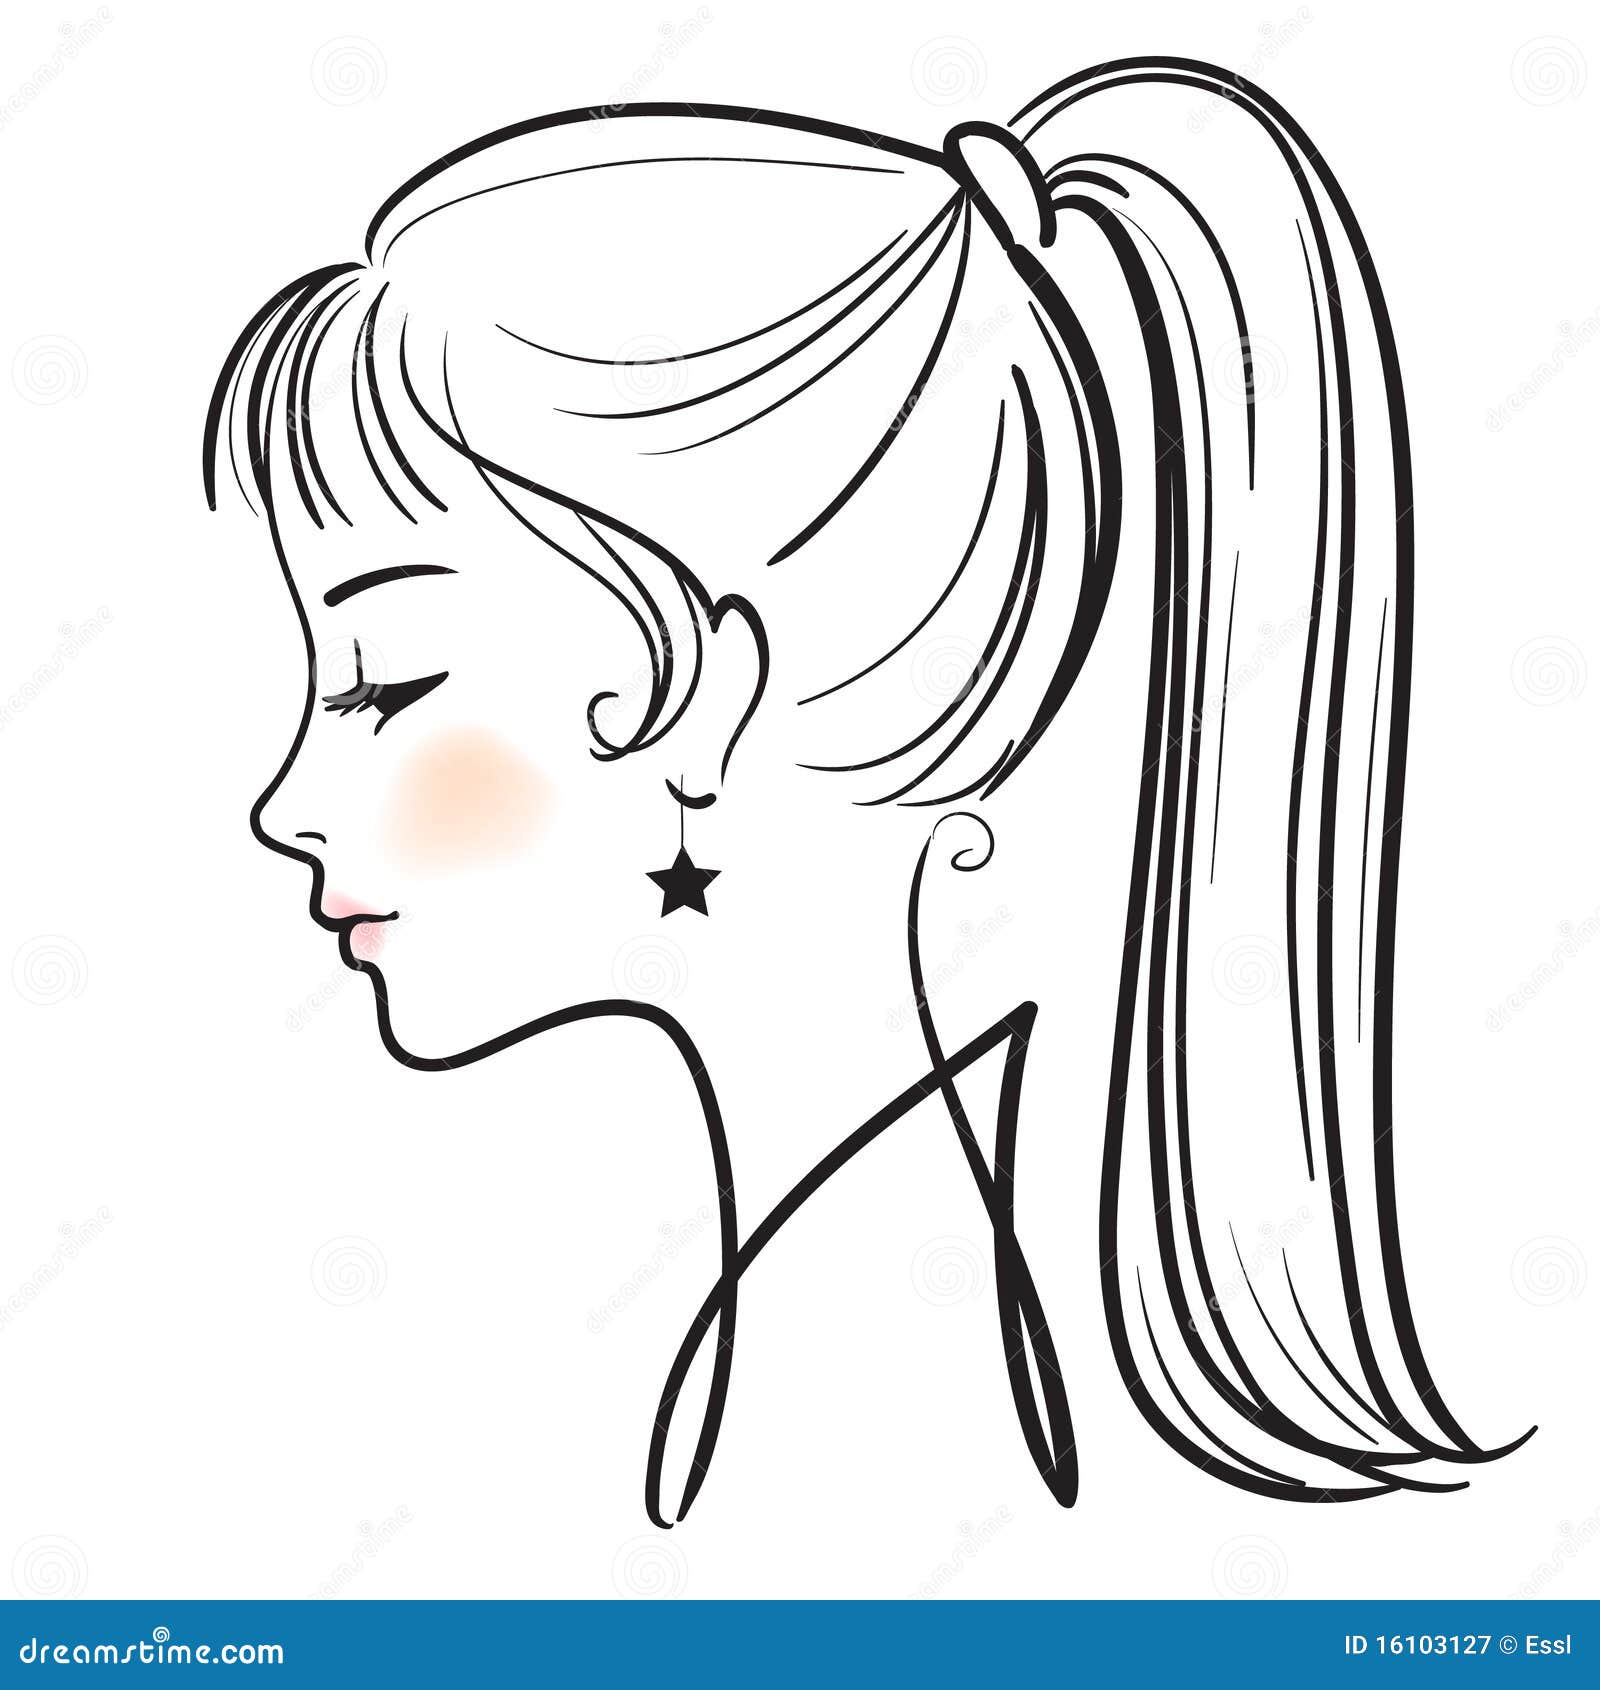 Premium Vector | Simple line art of a woman seen from the side on white  background